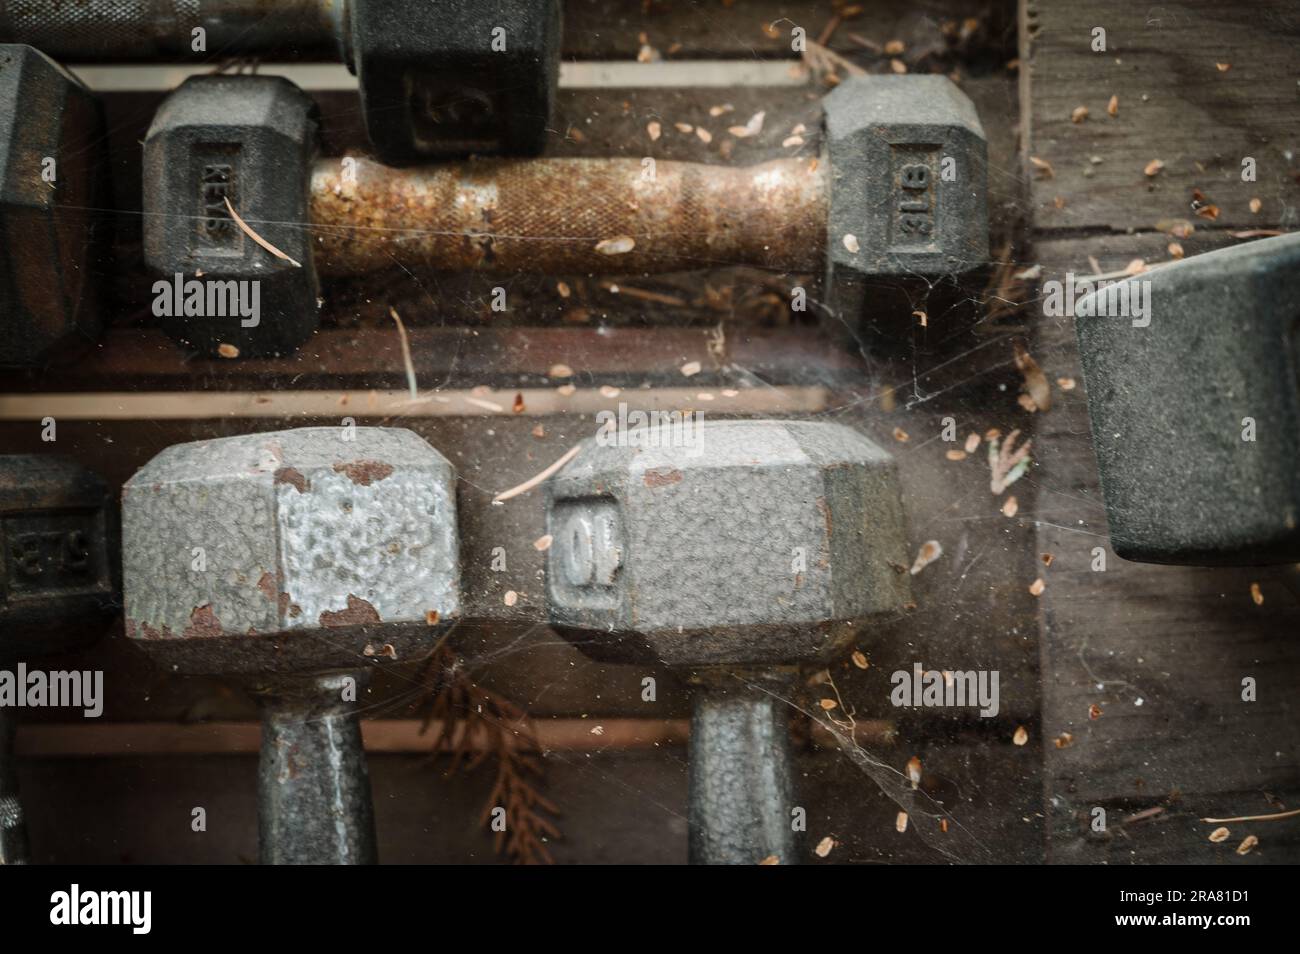 Rusty cobweb covered weight lifting equipment.  Weights and dumb bells and dumbbells abandoned, ignored, and covered in rust. Stock Photo